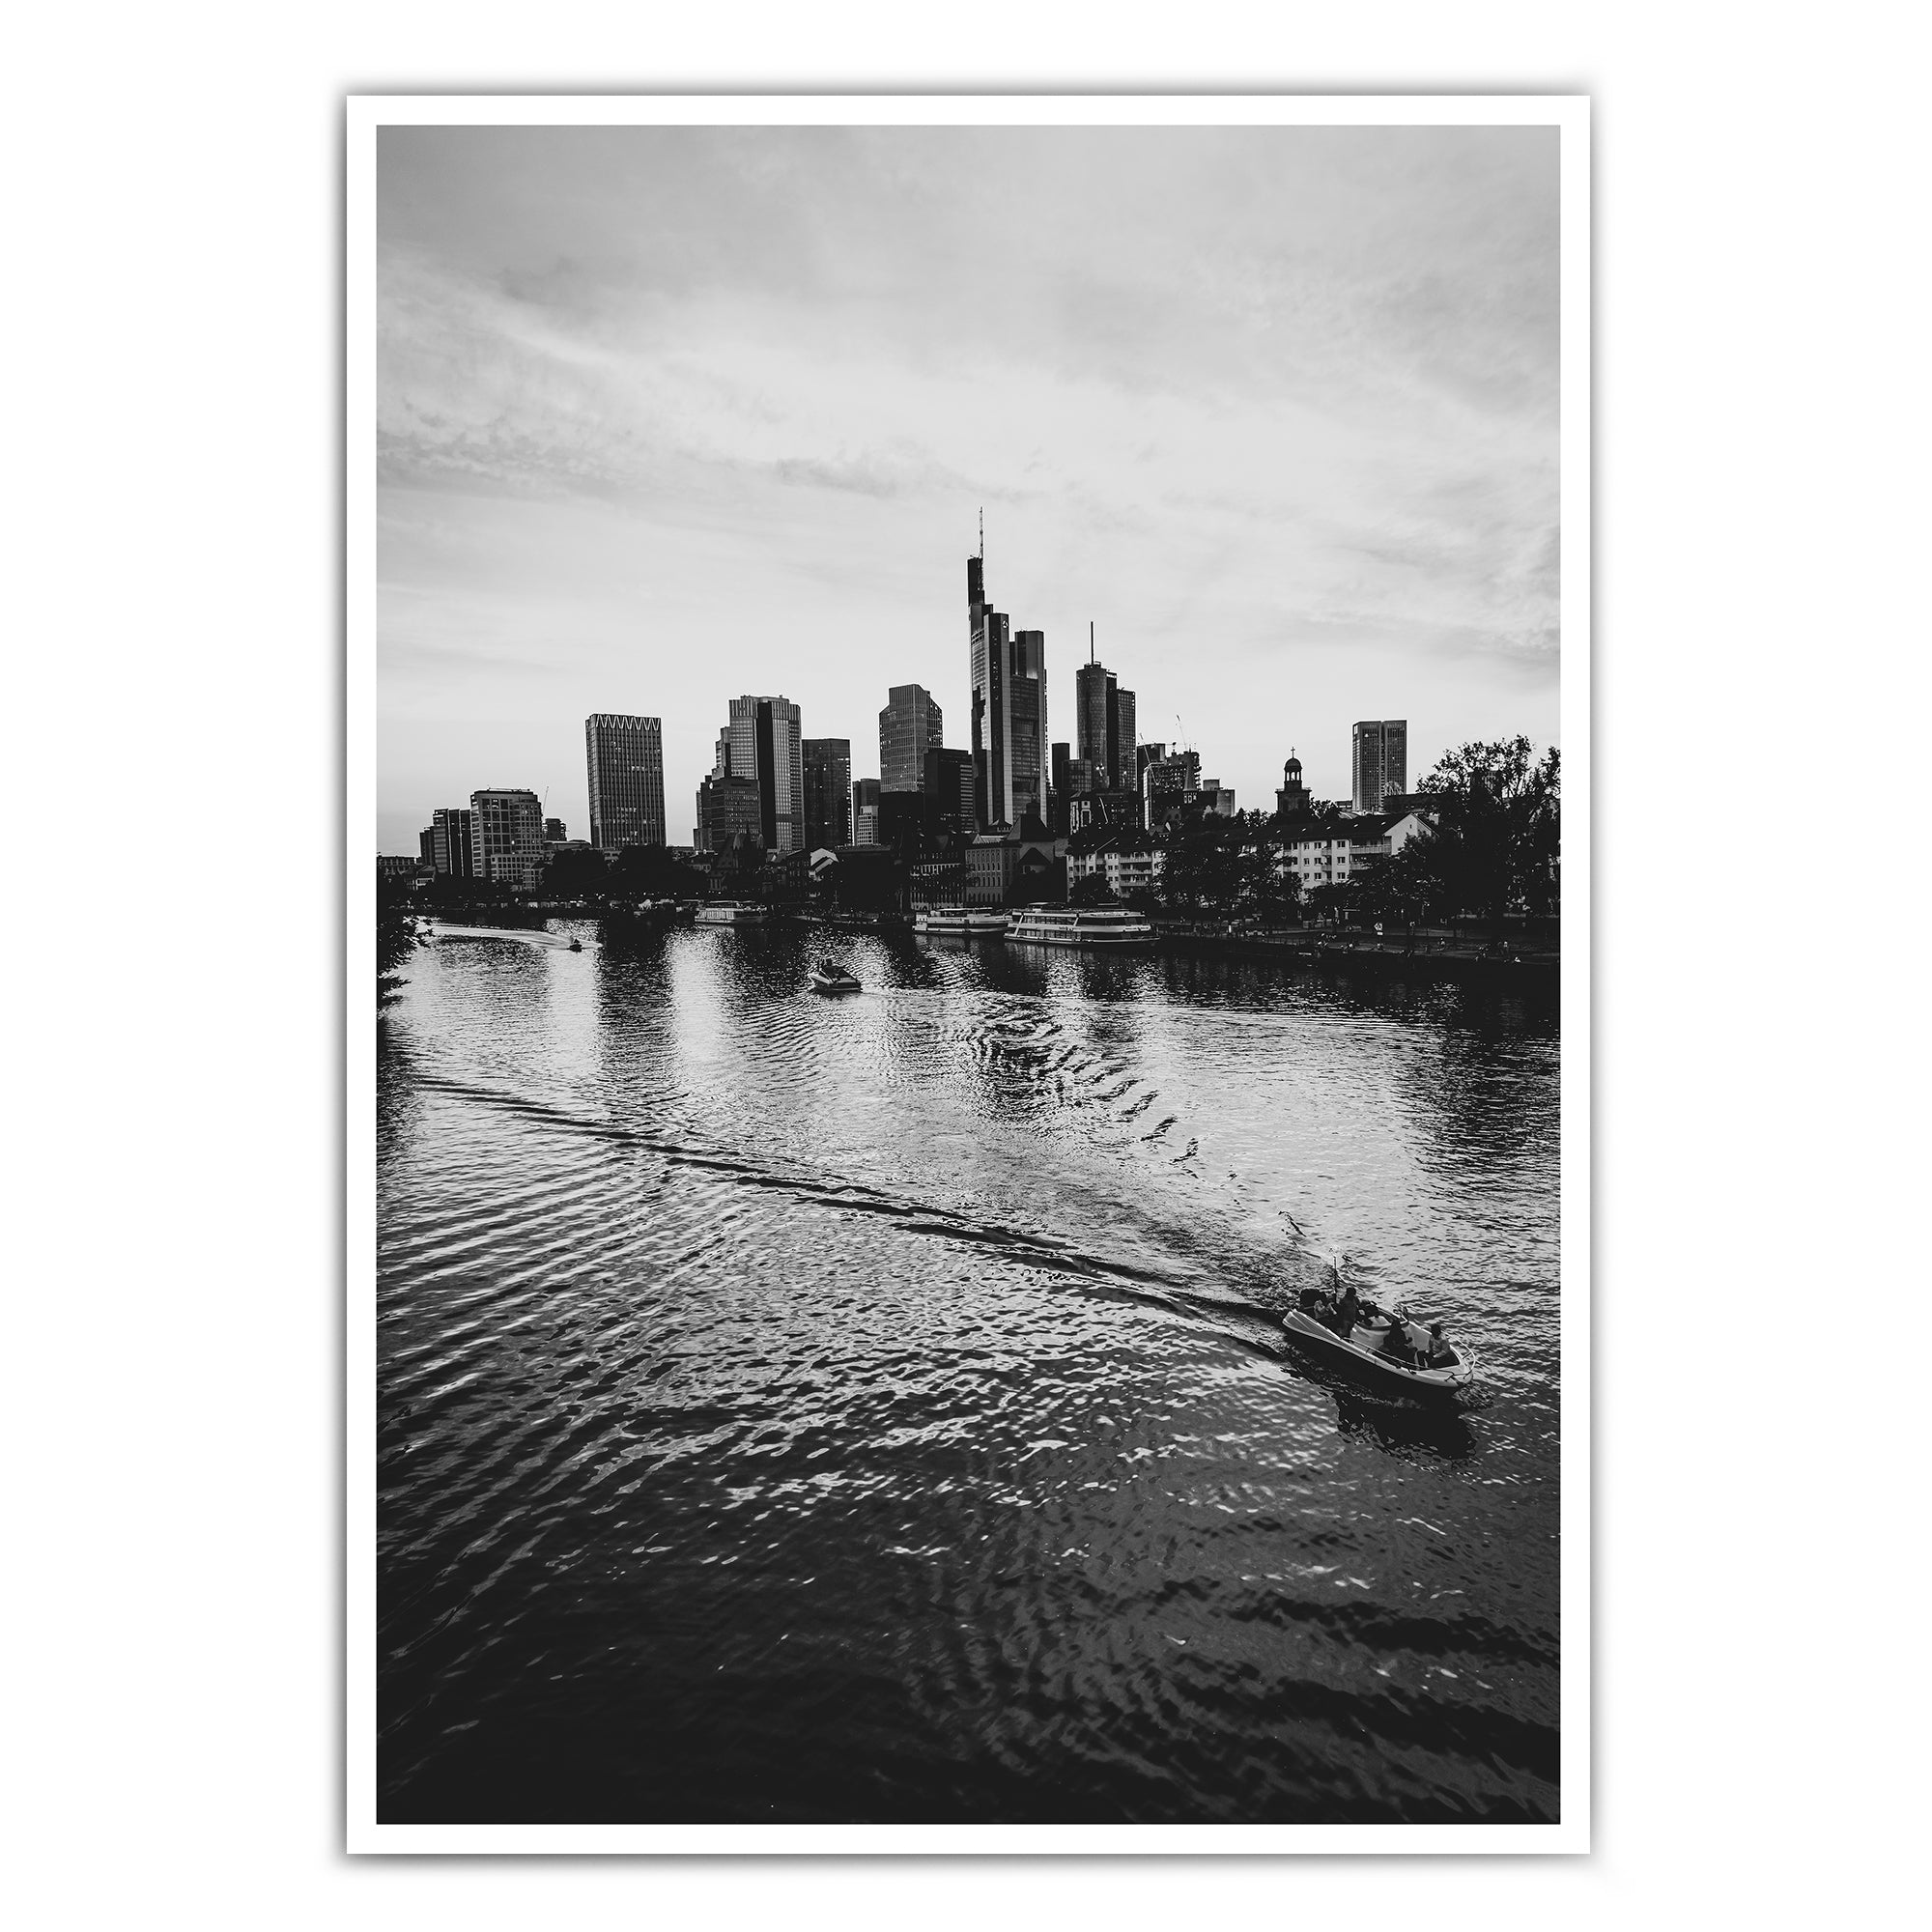 4one-pictures-frankfurt-am-main-poster-skyline-bild-ffm-kunstdruck-shop-5mm_84657ac8-864d-44a5-b5b5-d563182a502d.jpg